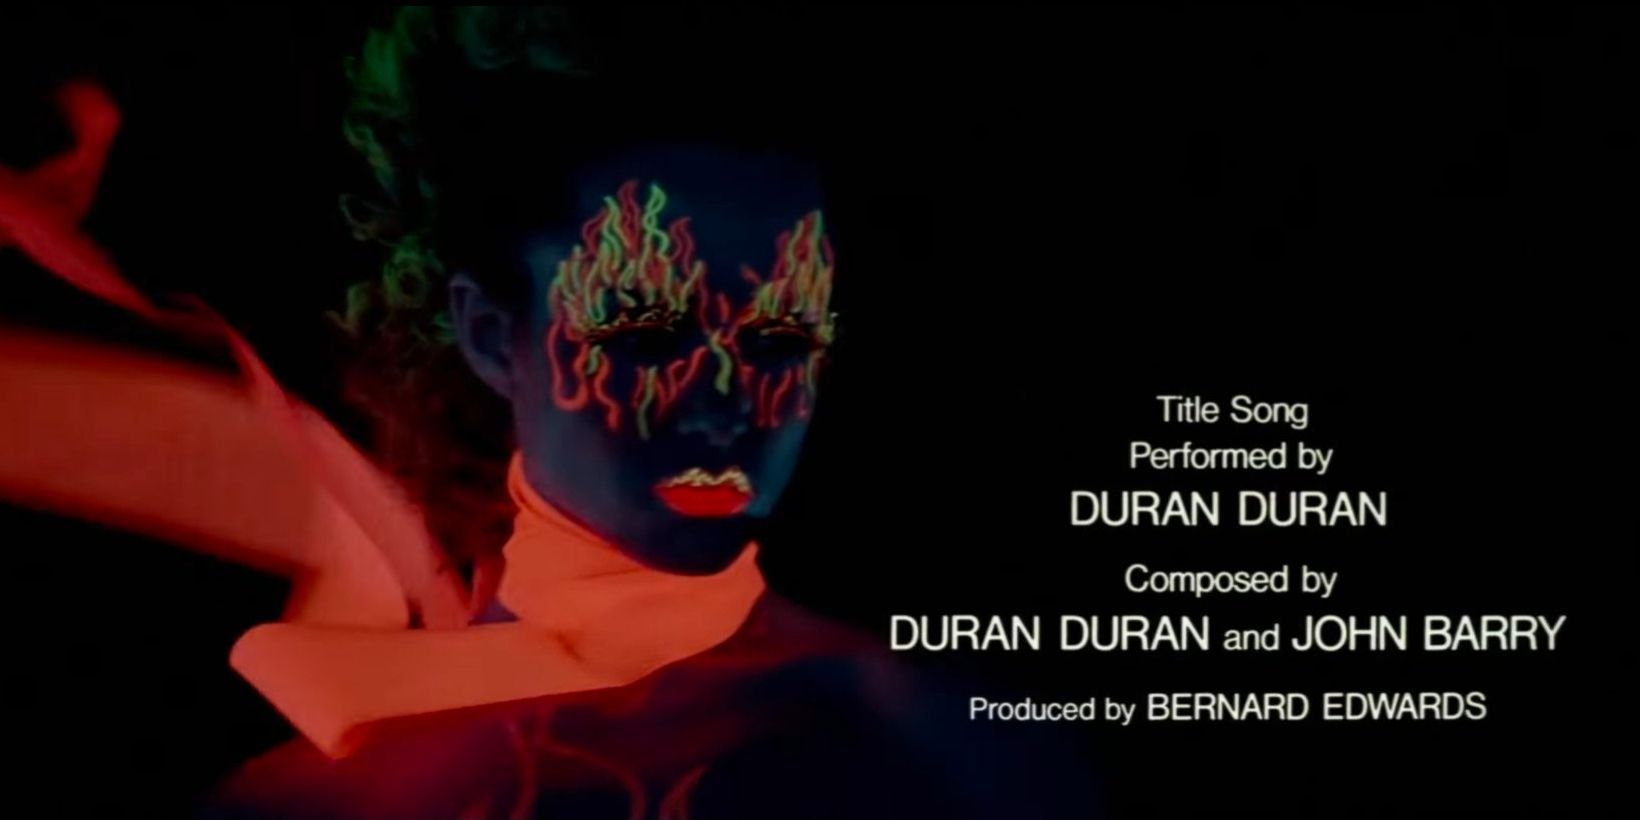 A woman's bright orange scarf and make-up glow in the blacklight during the opening credits of 'A View to a Kill'.